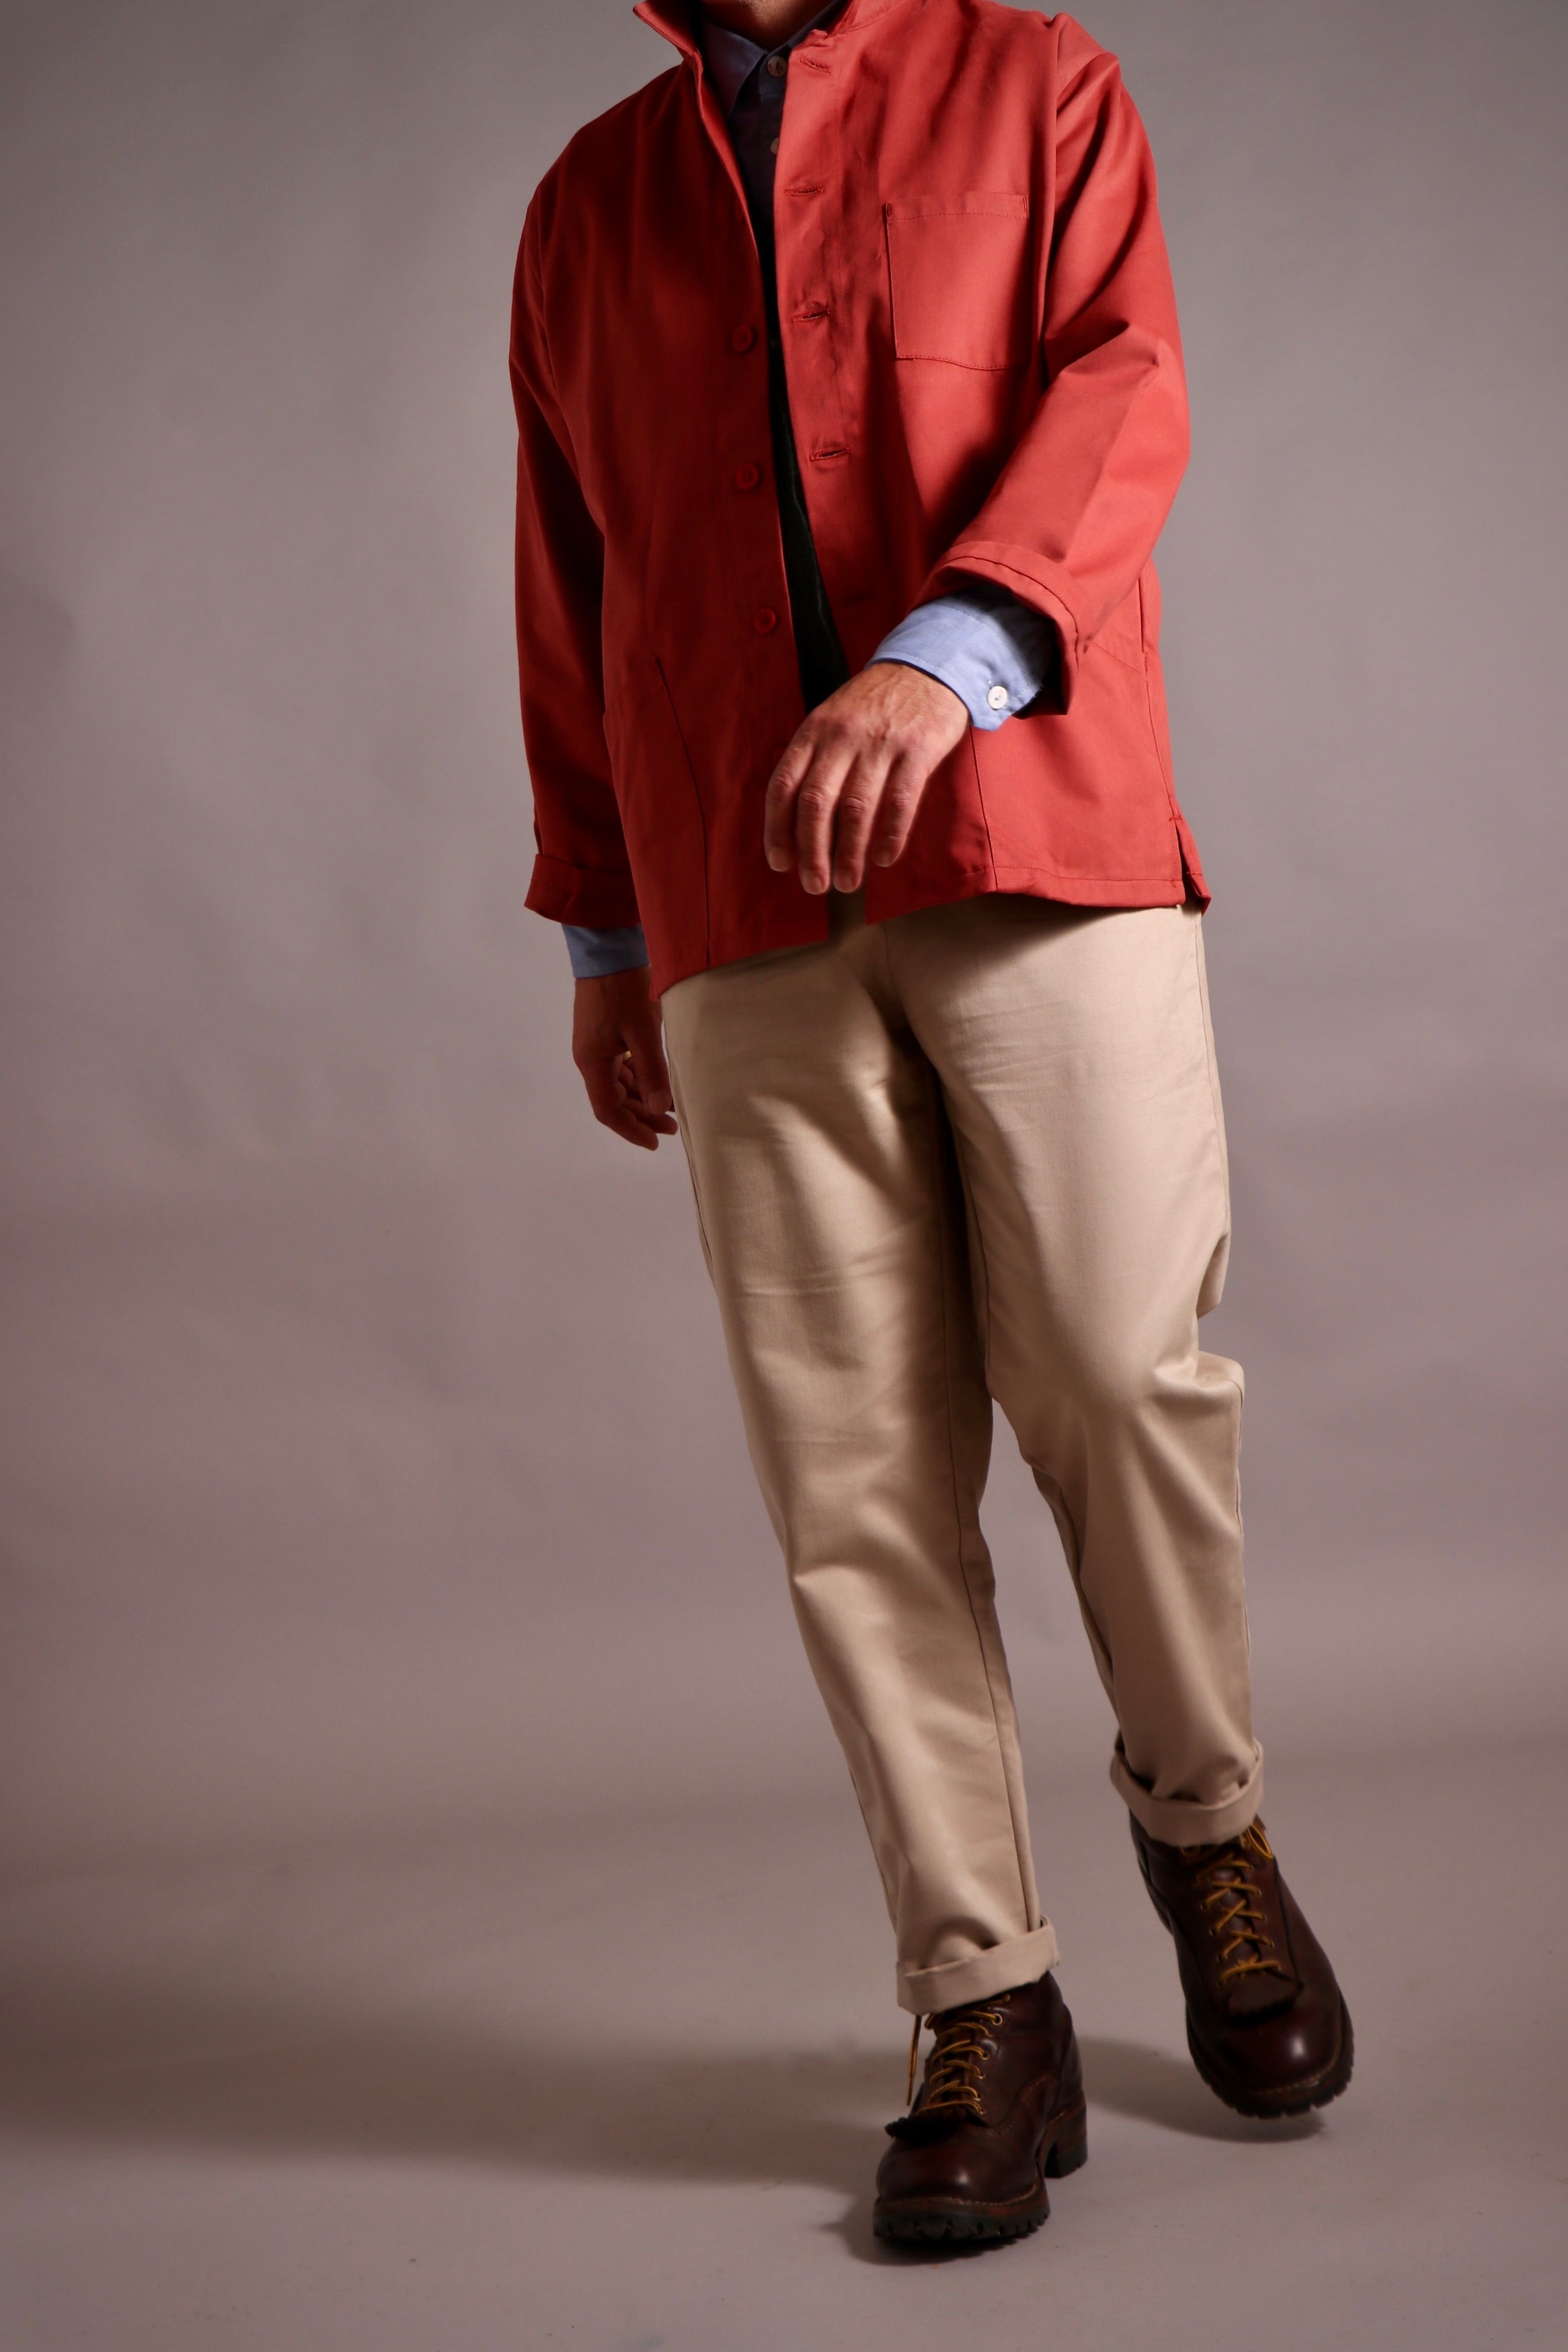 Enzo wears High Waist Trousers with Norfolk Work Jacket and Pinpoint Chambray Shirt